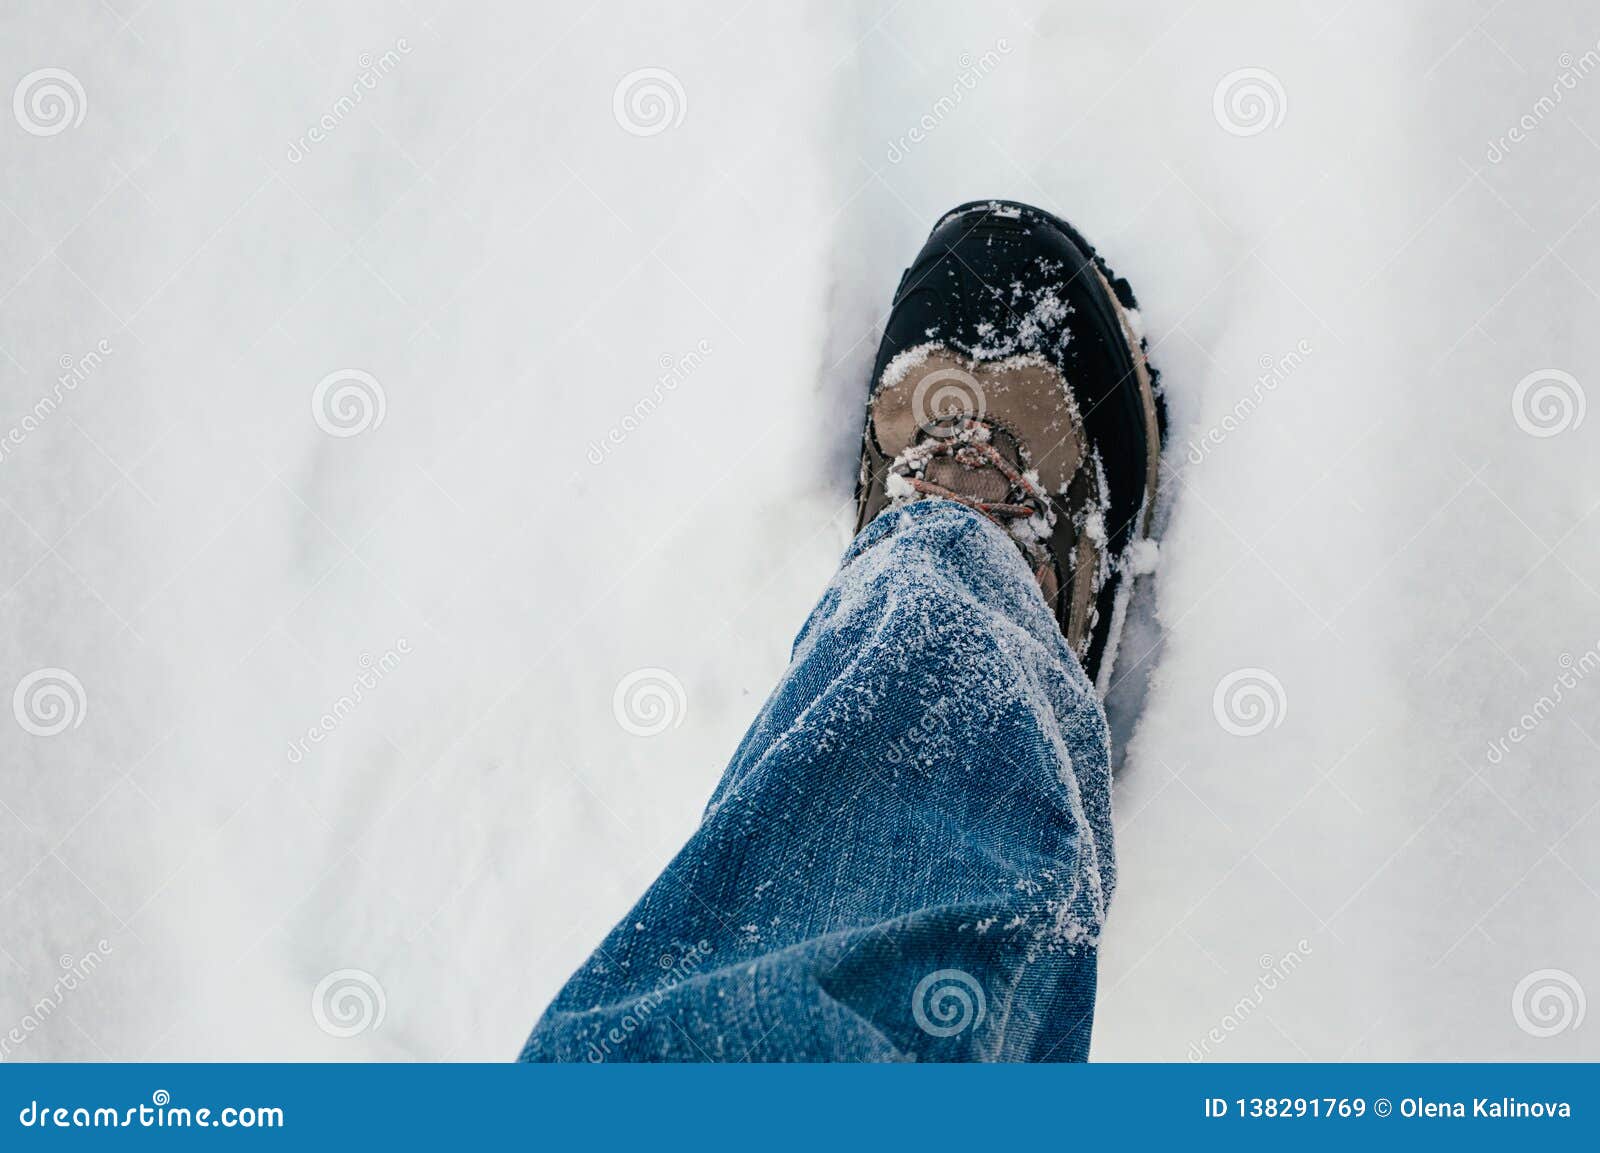 Male Leg Walking in Snow Blue Jeans Stock Image - Image of life, jeans ...